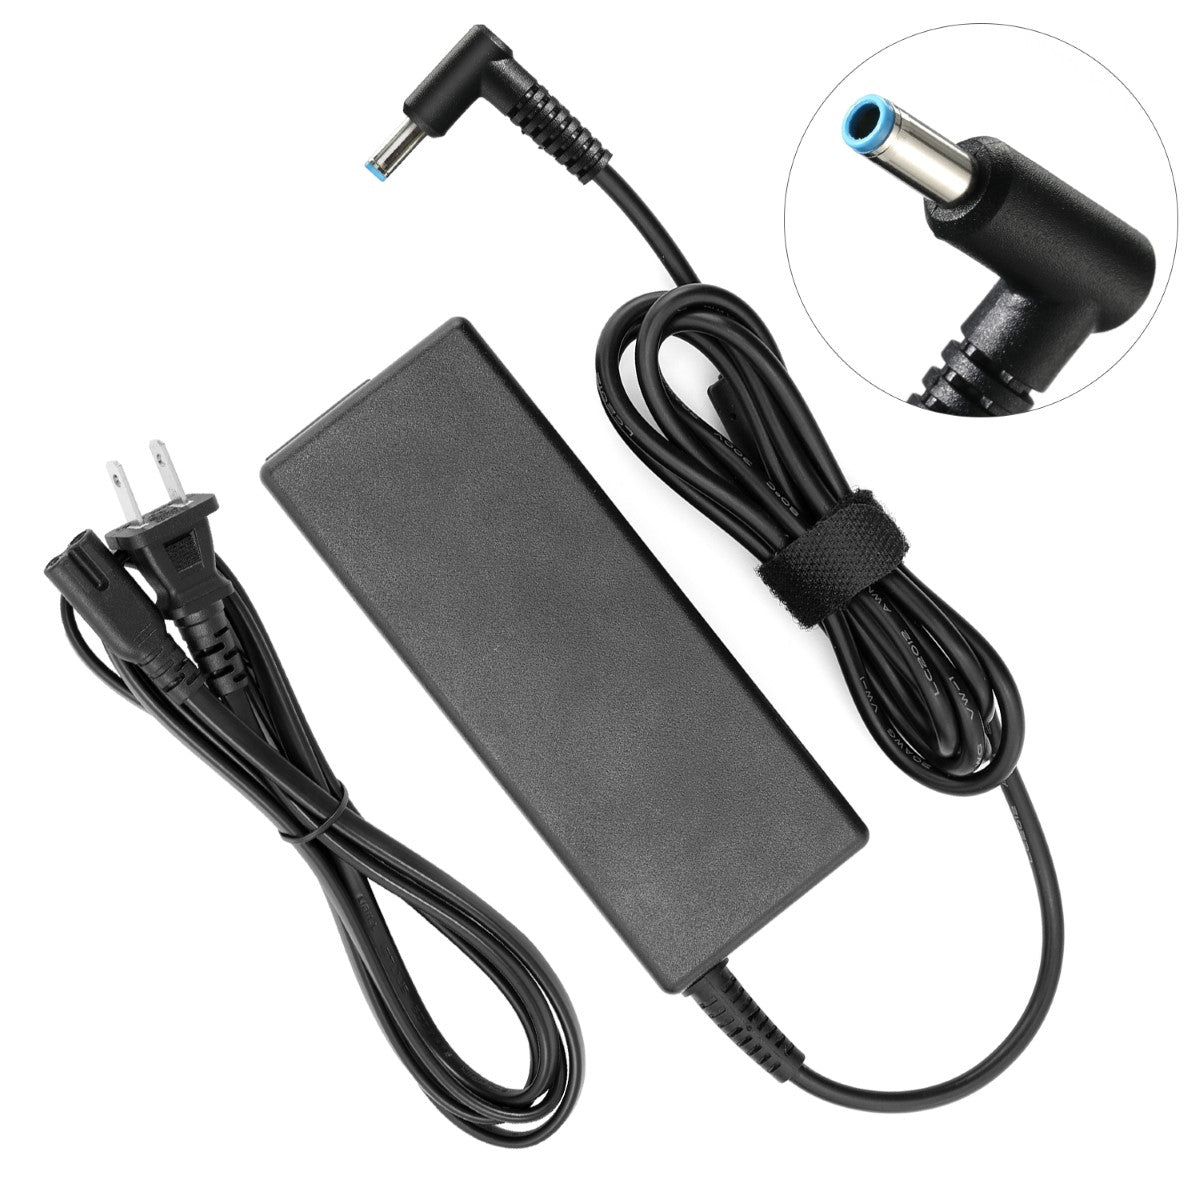 AC Adapter Charger for HP Envy TouchSmart m7-j020dx Notebook.